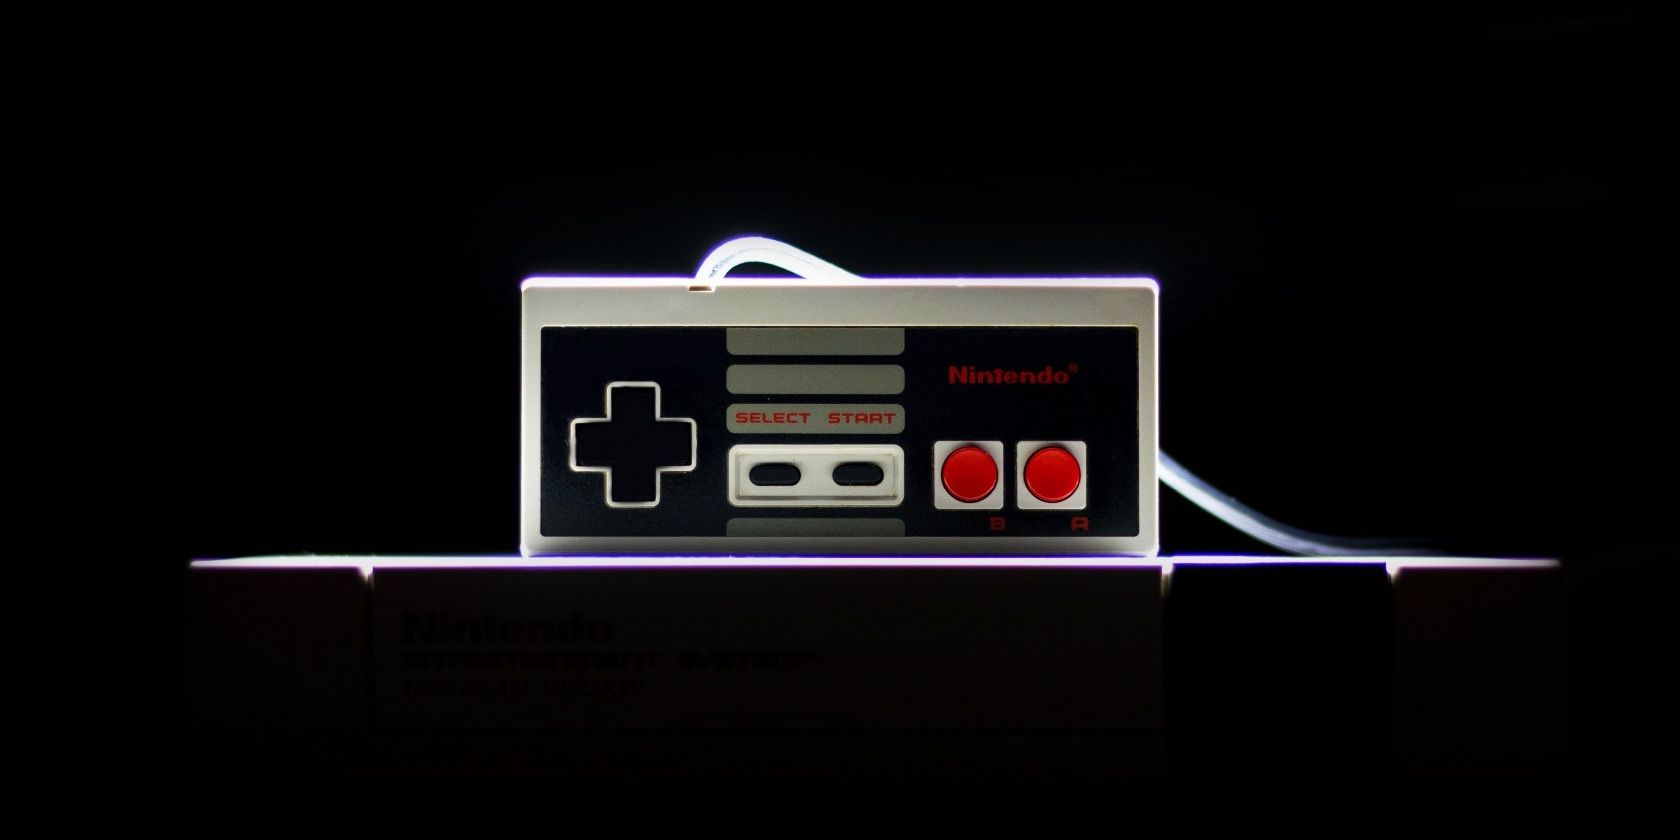 An image of a backlit NES controller